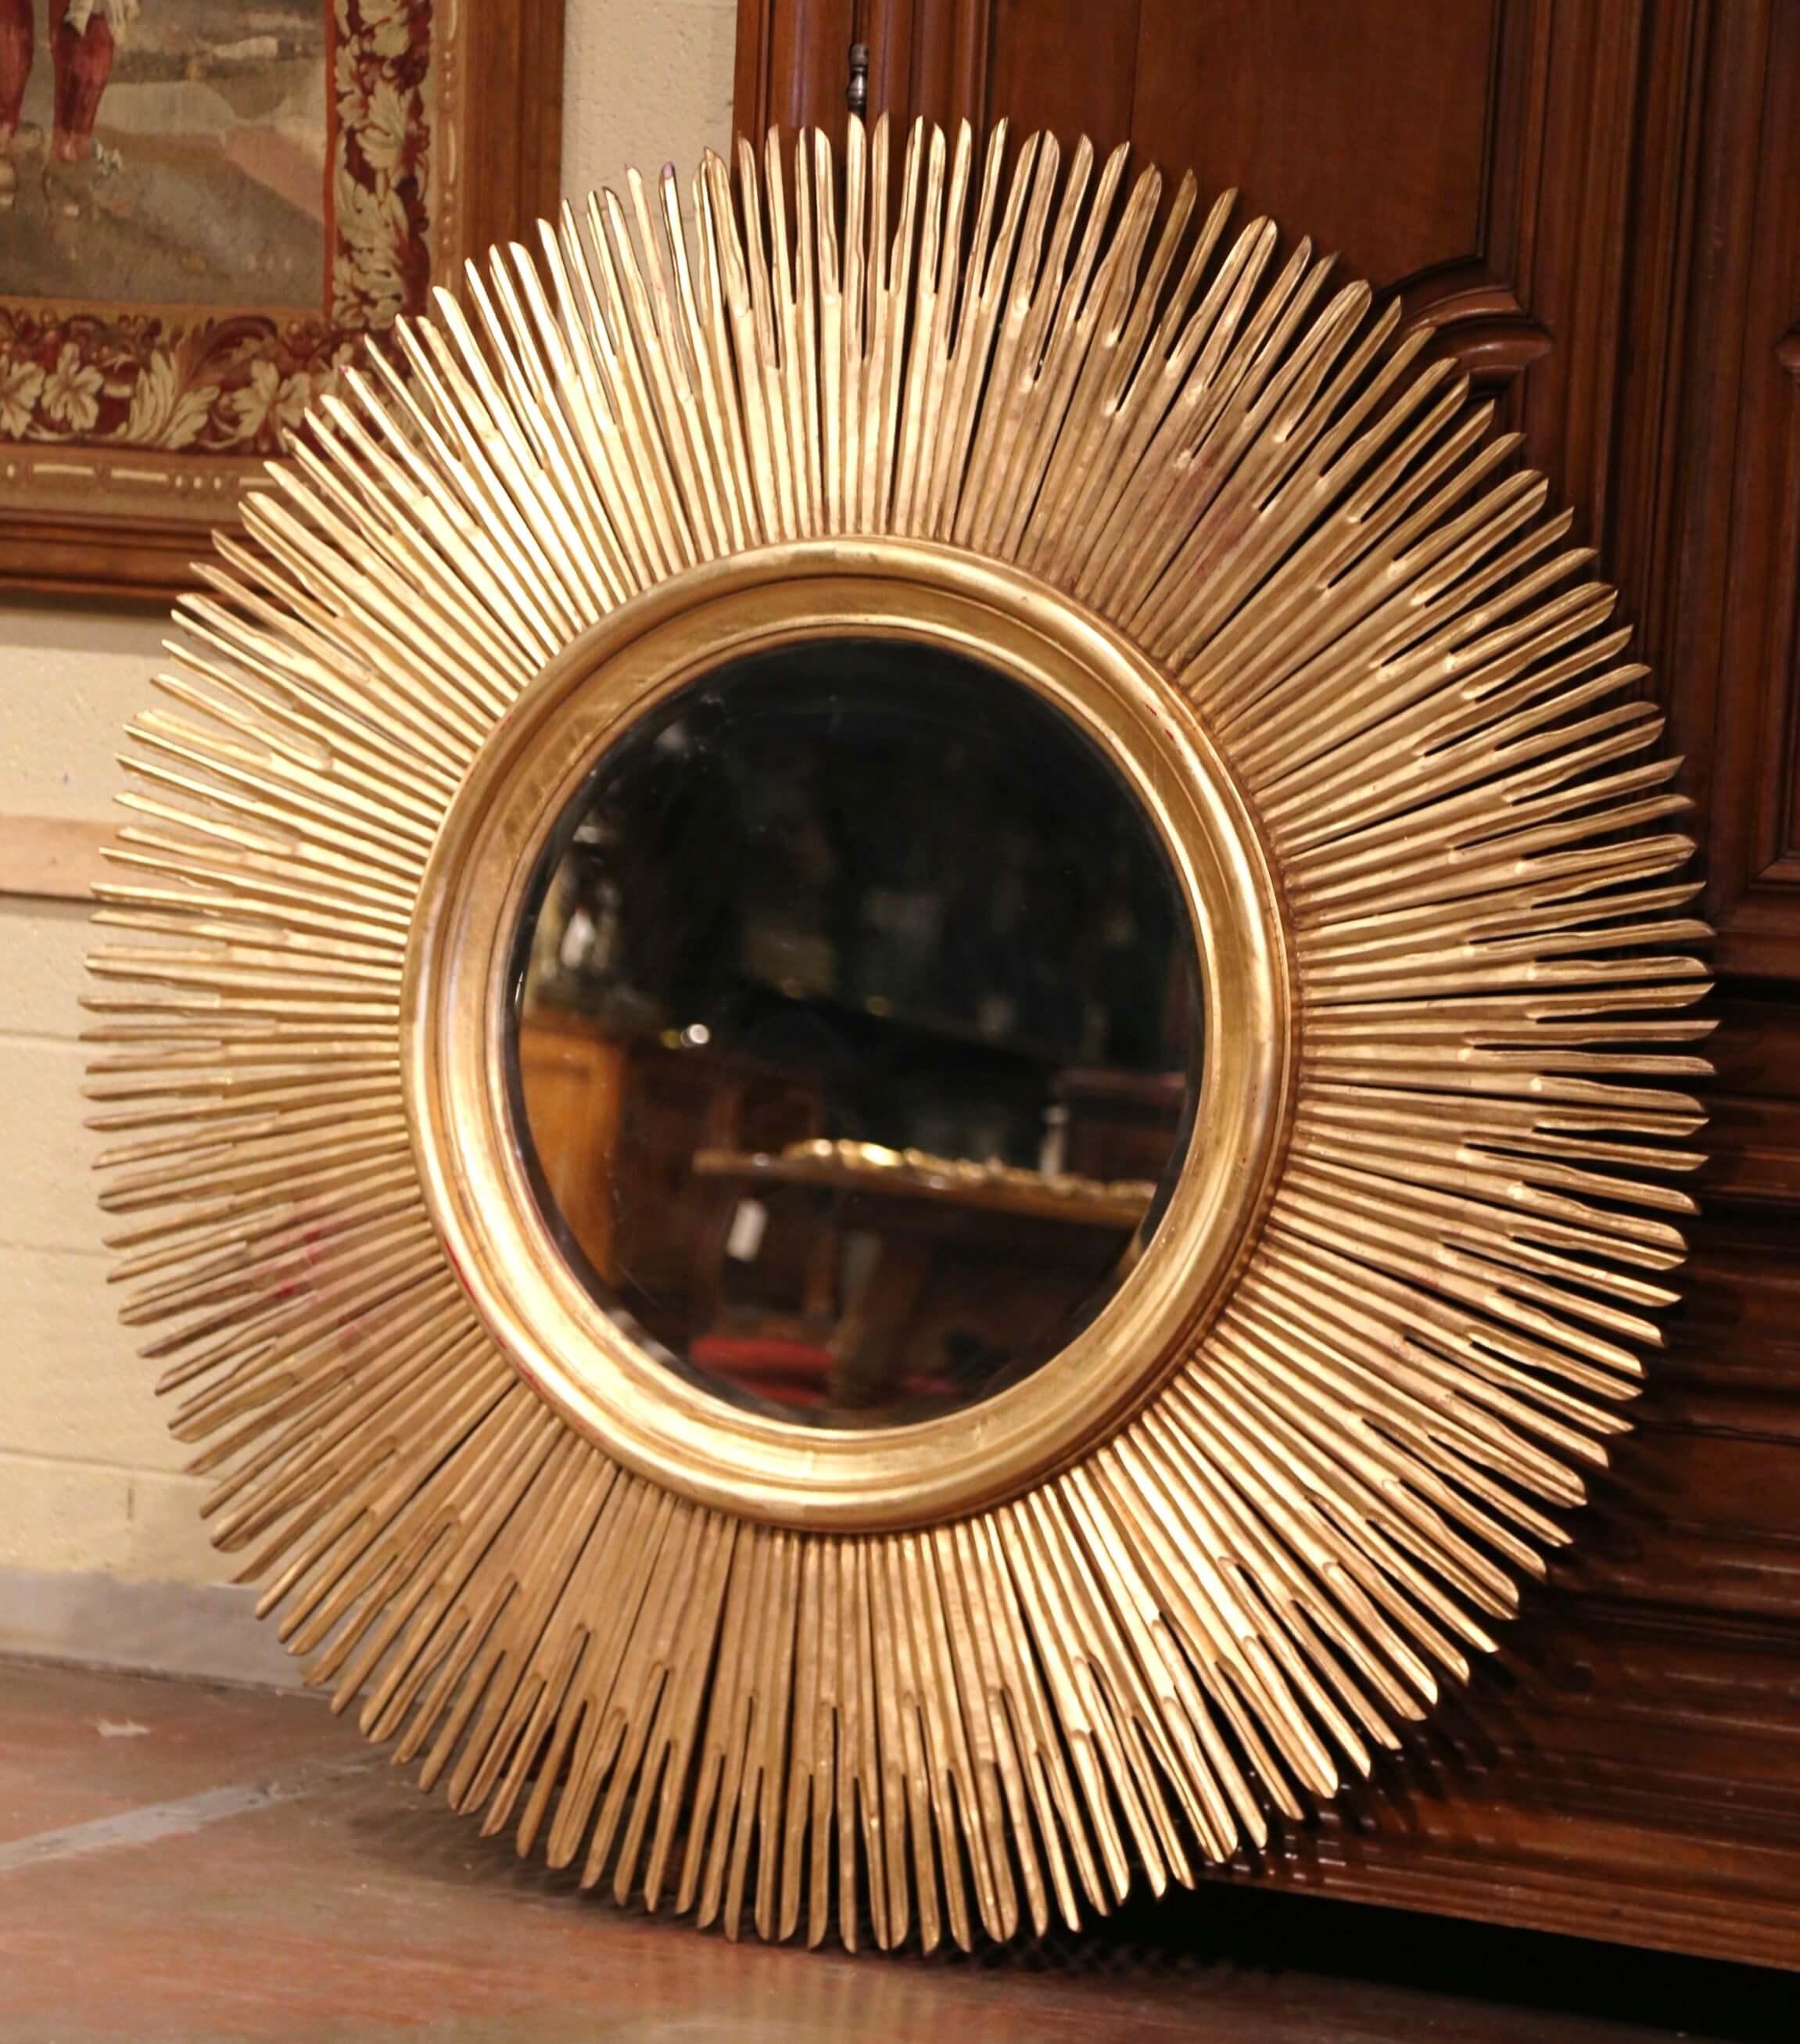 Add a beautiful shine to your home with this important eye-catching sun mirror. Created in Italy circa 2010 and almost five feet in diameter, the large vintage mirror has a classic sunbeam shape with outstretching rays, a central circular beveled